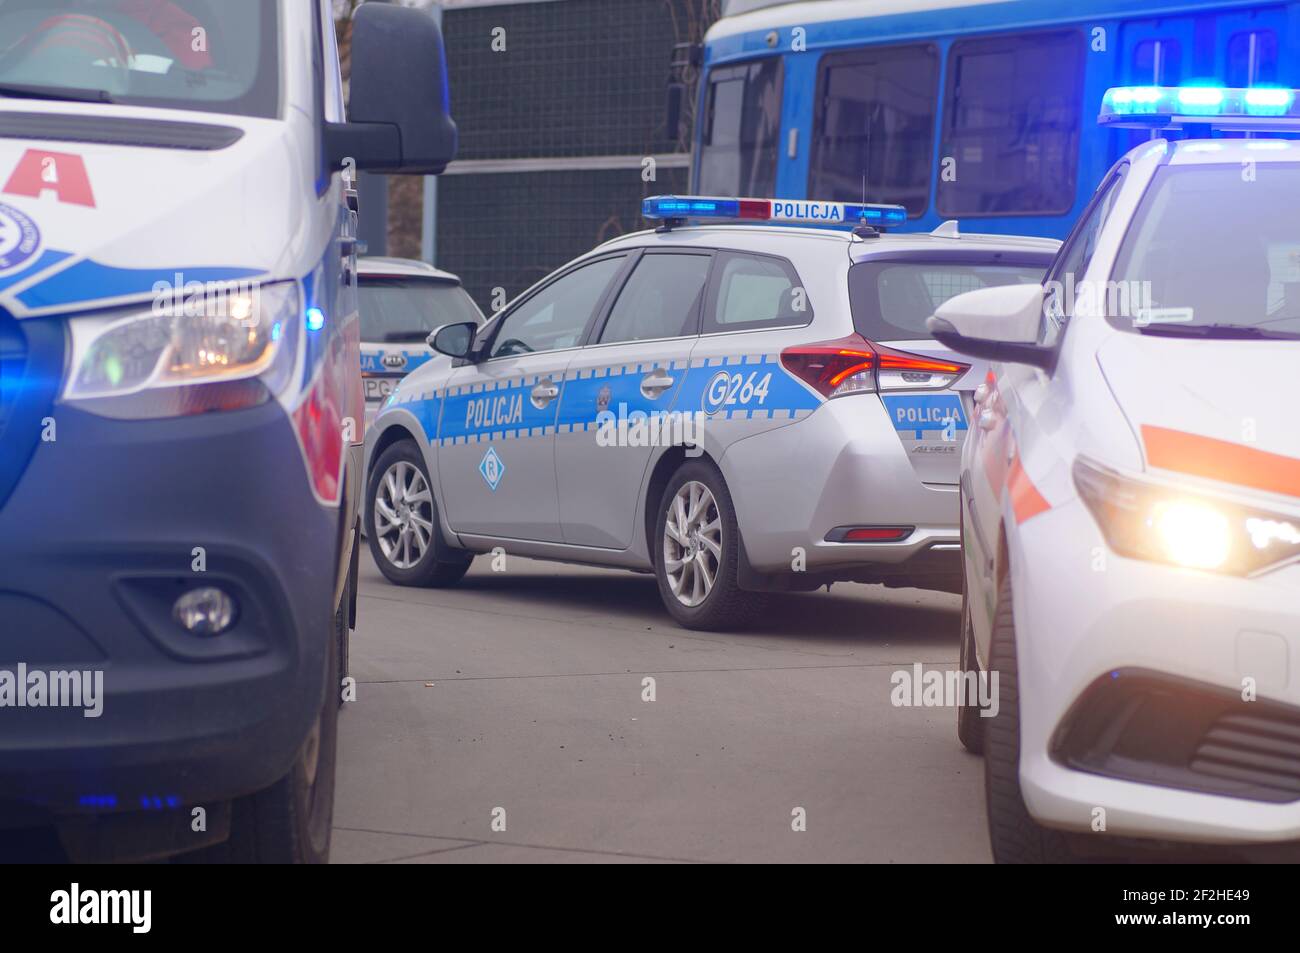 Police intervention in a tramway Stock Photo